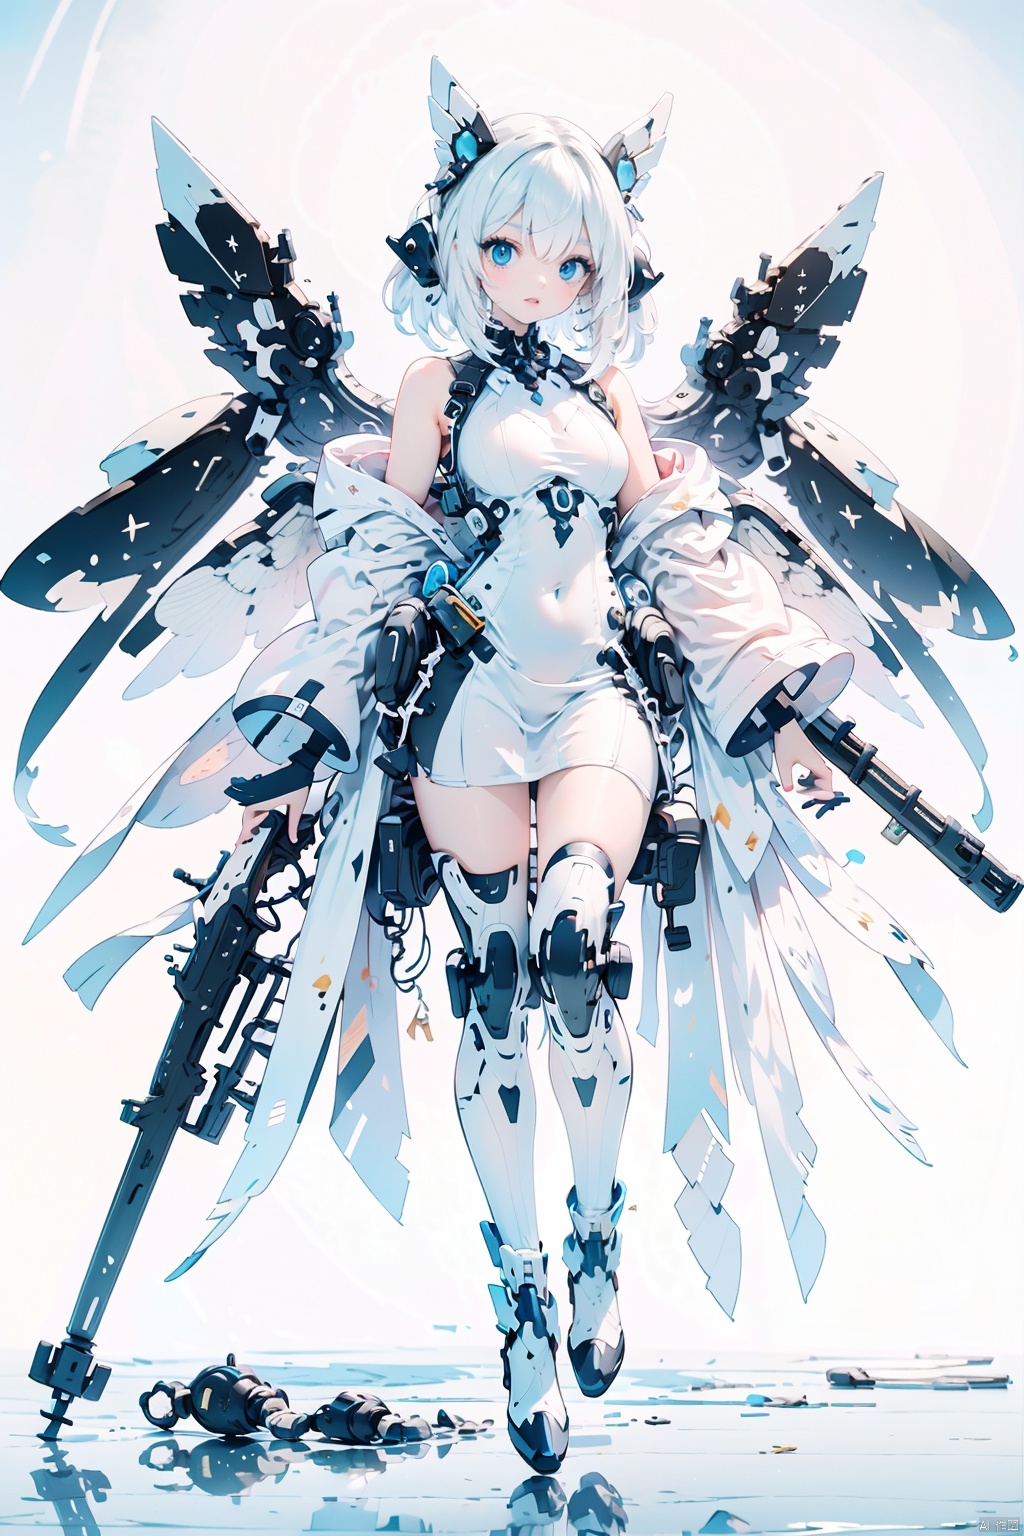  The image depicts a robot girl with white hair and blue eyes, dressed in a white dress and black boots. she has two mecha white wings with a giant fan on each wing. She is standing in a blue splash and carrying a sword on her right and a gun on her left., baimecha, machinery